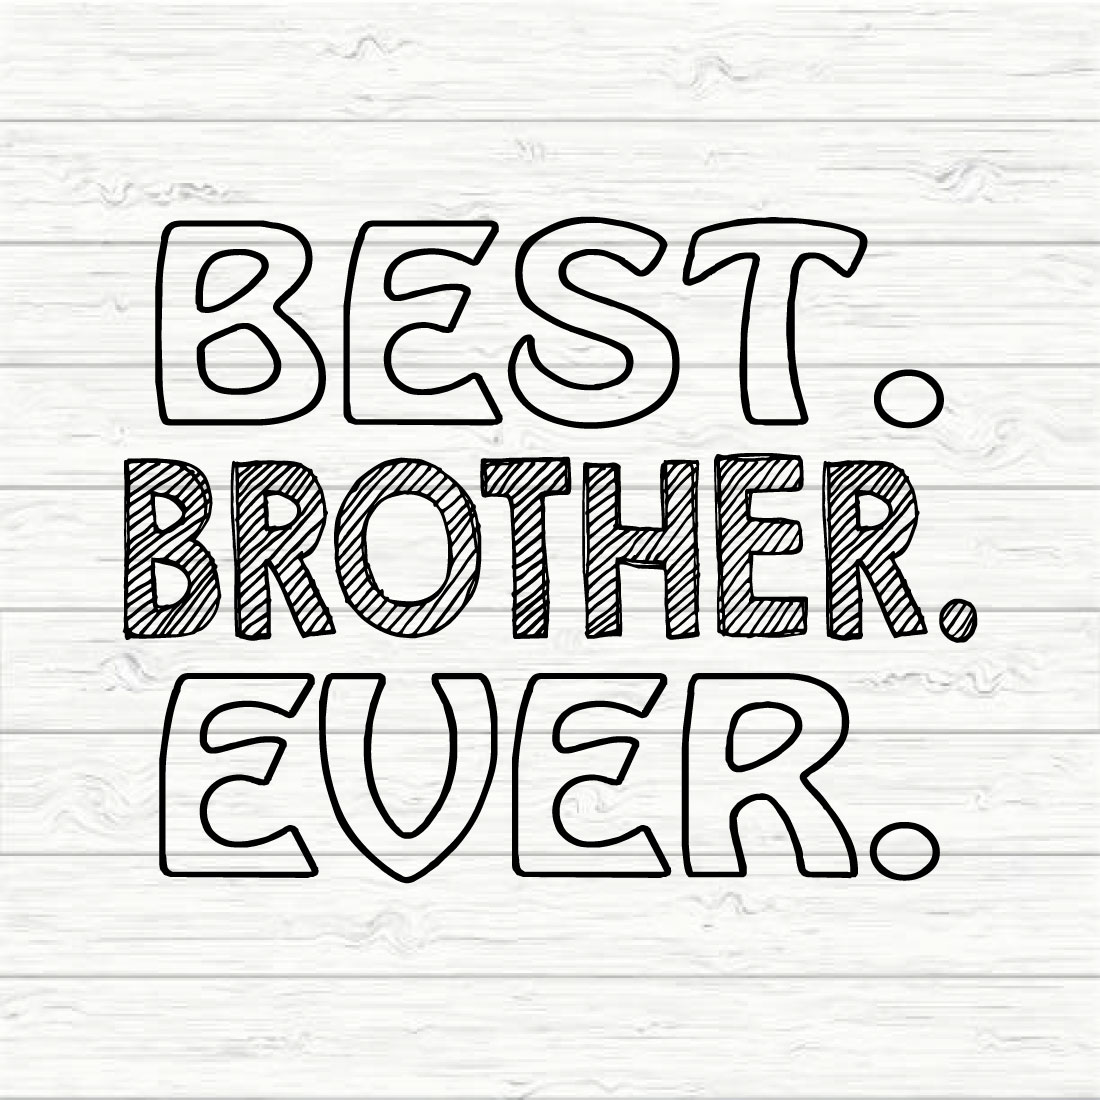 Best brother ever preview image.